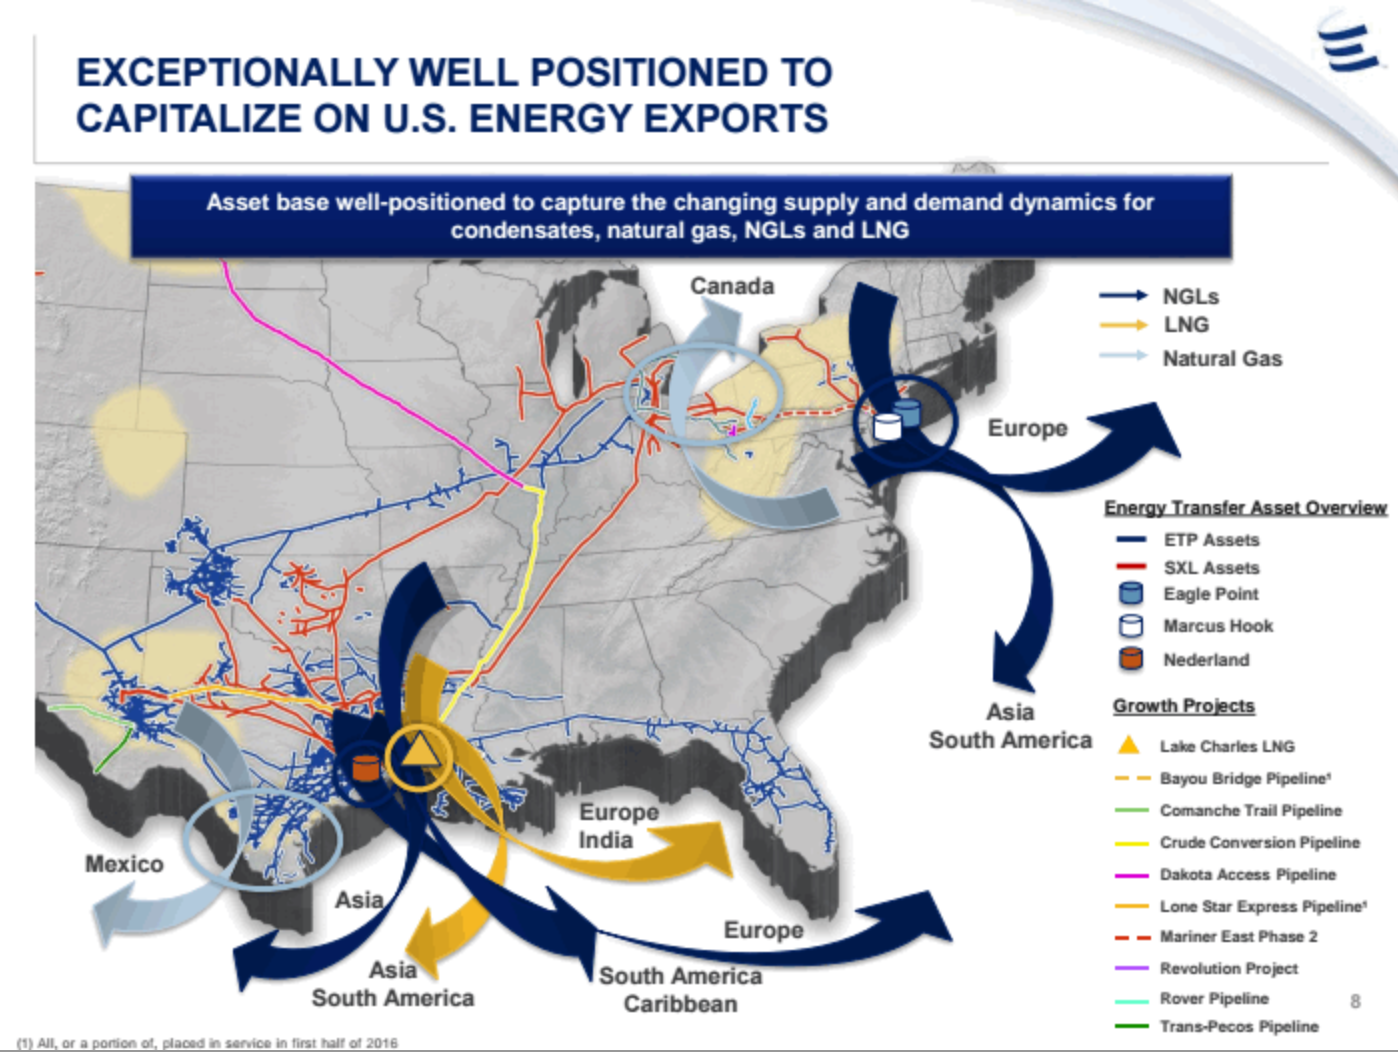 Dakota Access Pipeline DAPL is excited to explore foreign oil export options!